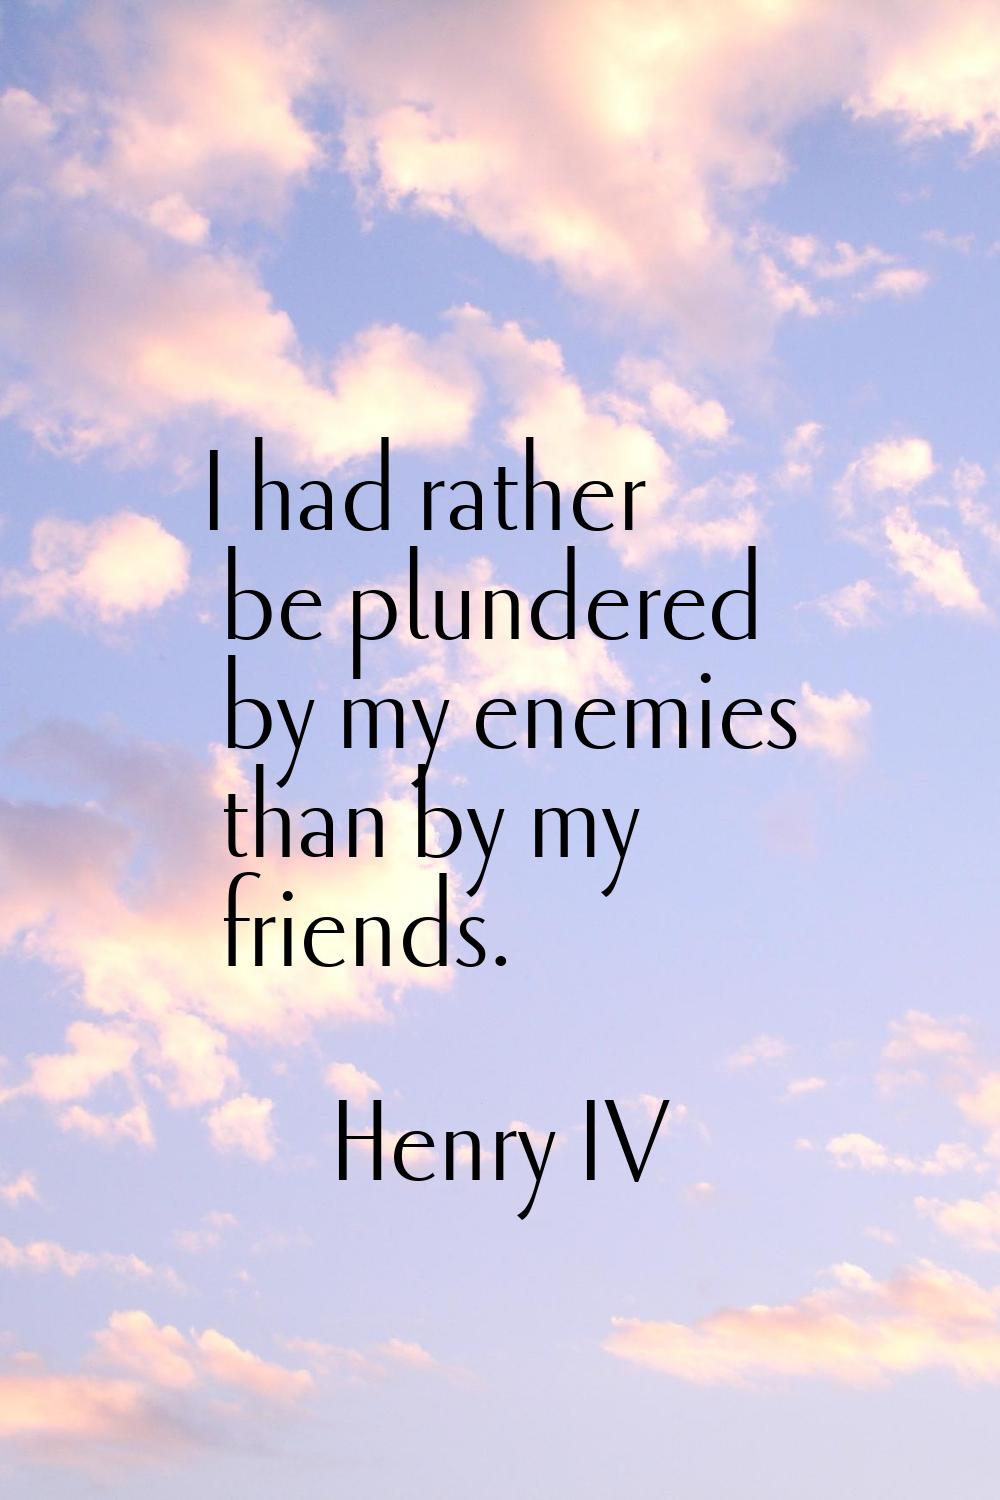 I had rather be plundered by my enemies than by my friends.